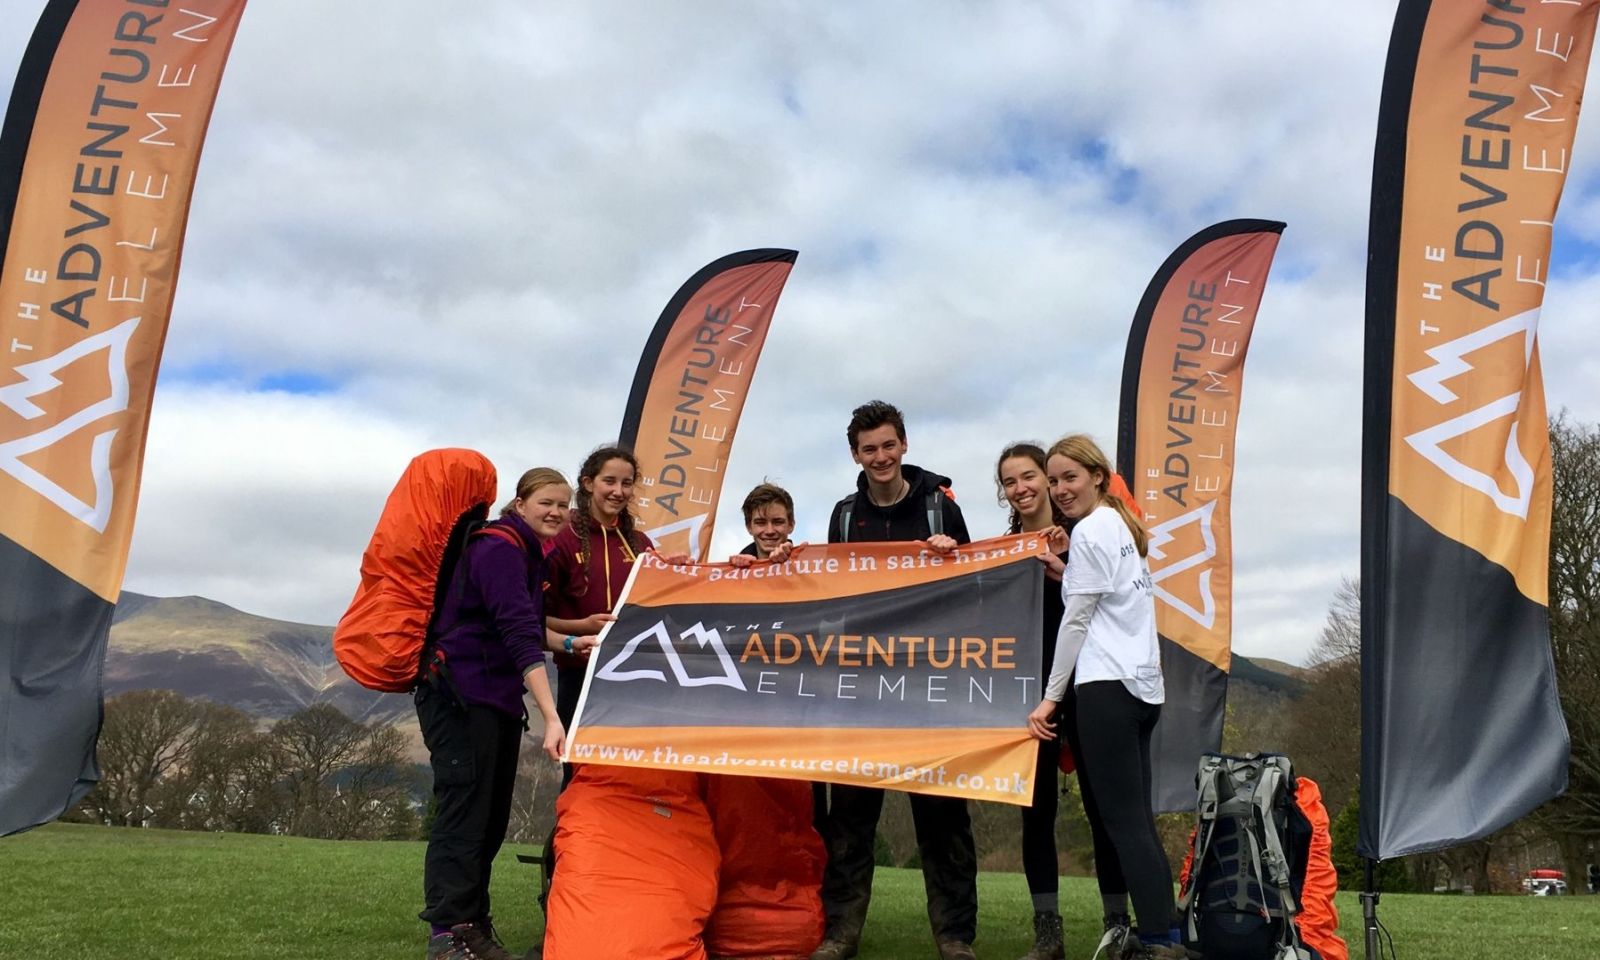 Group of DofE participants stand in front company flag and holding The Adventure Element flag.